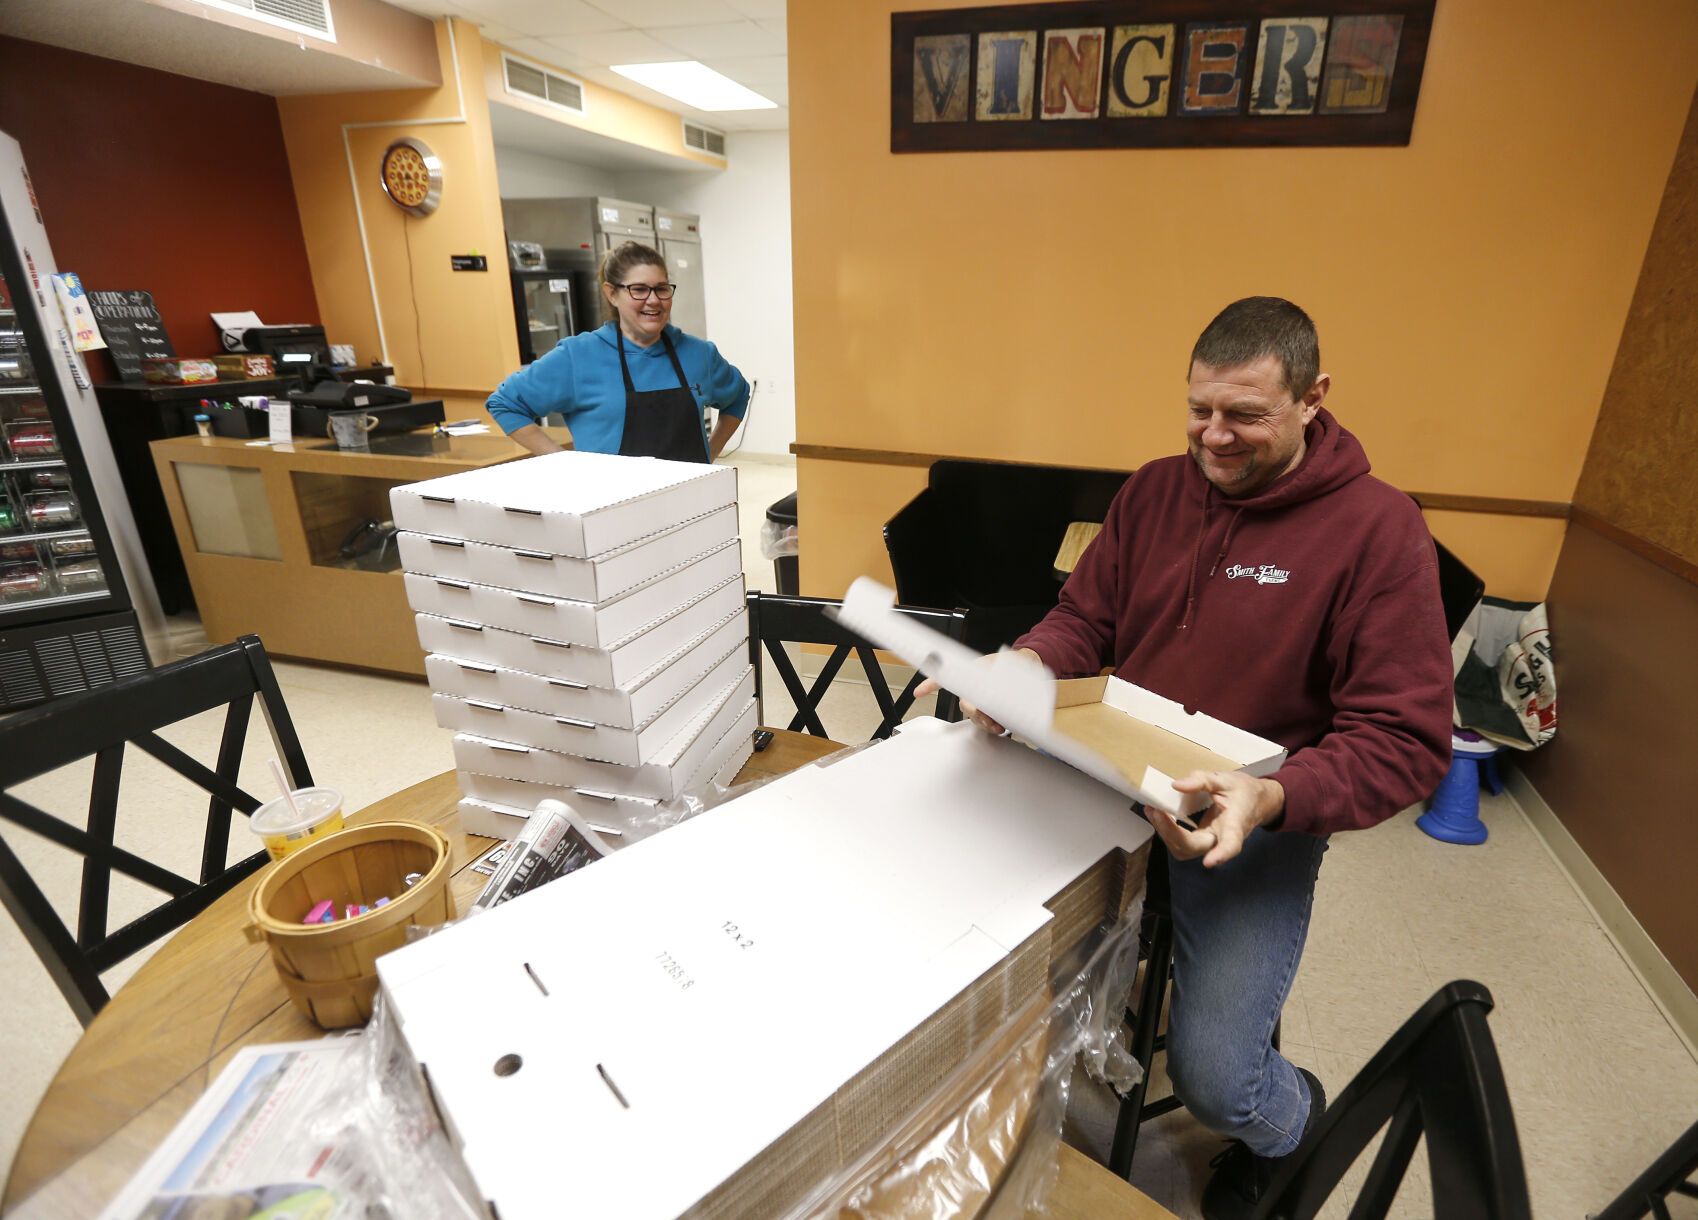 Owners of Vinger’s Pizza in Darlington, Wis., Val Smith and her husband Steve get boxes ready before opening Saturday, Nov. 26, 2022.    PHOTO CREDIT: Dave Kettering